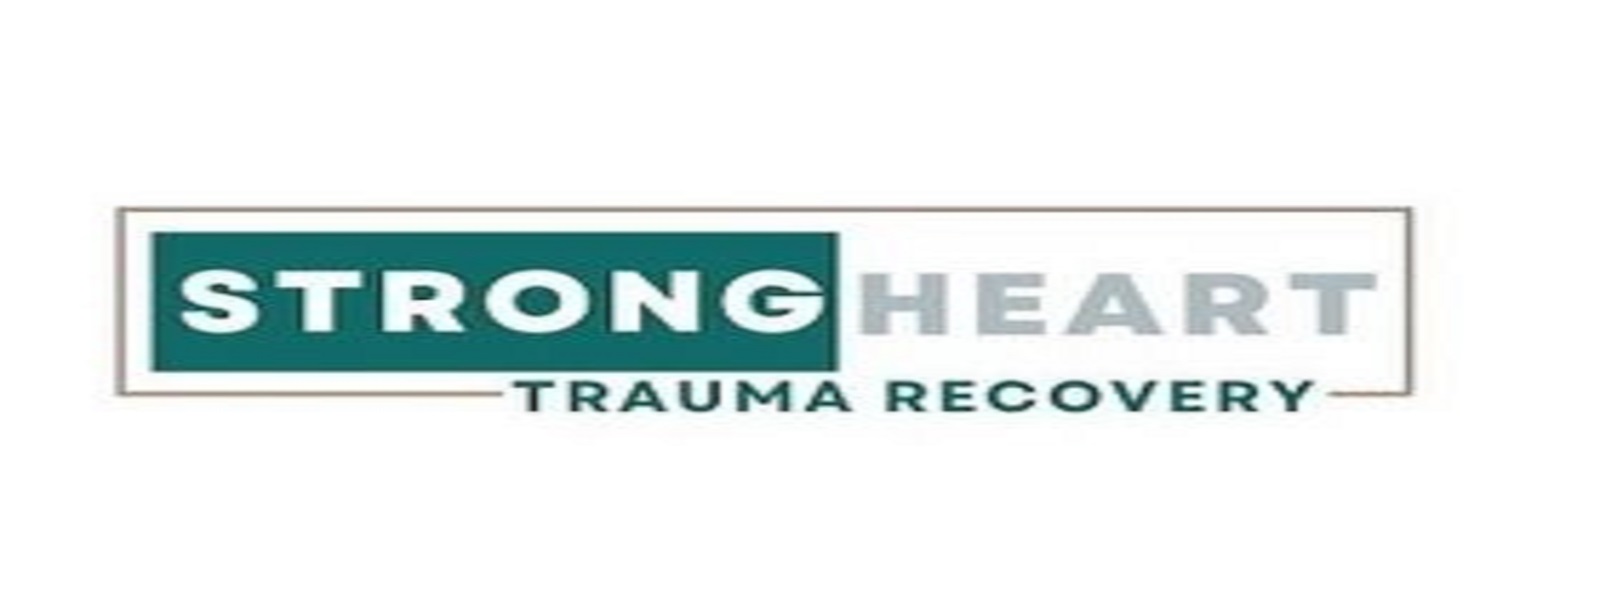 Strongheart Trauma Recovery Cover Image